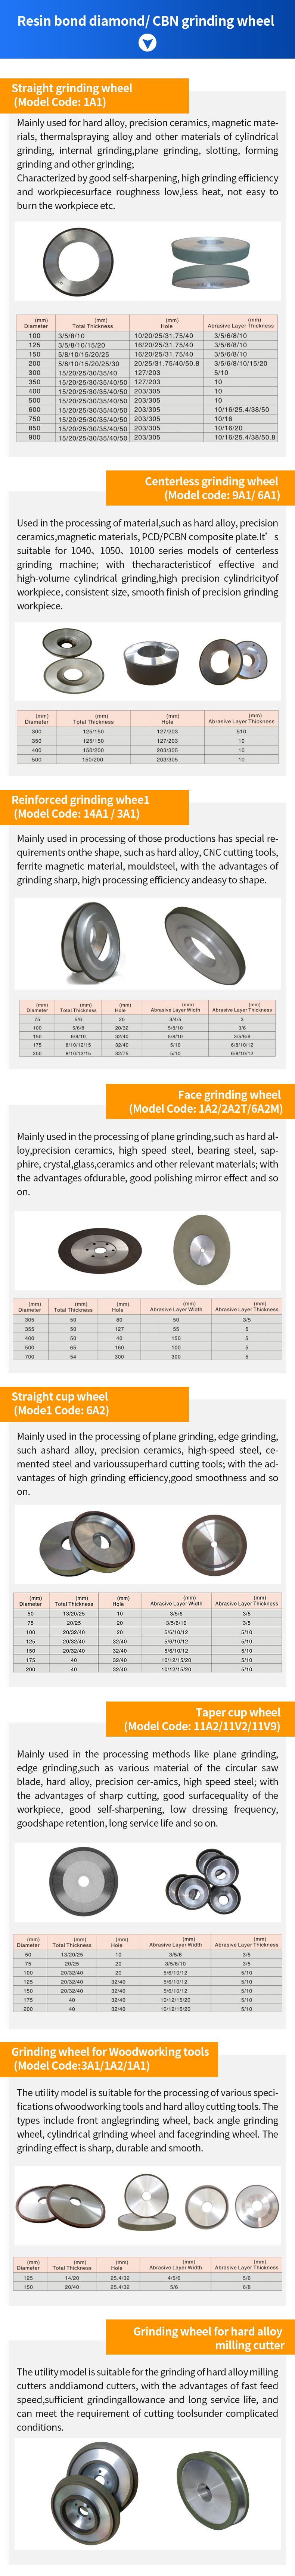 Gold resin bonded diamond grinding wheel blades 350 * 45 * 127 * 10 customized by the manufacturer